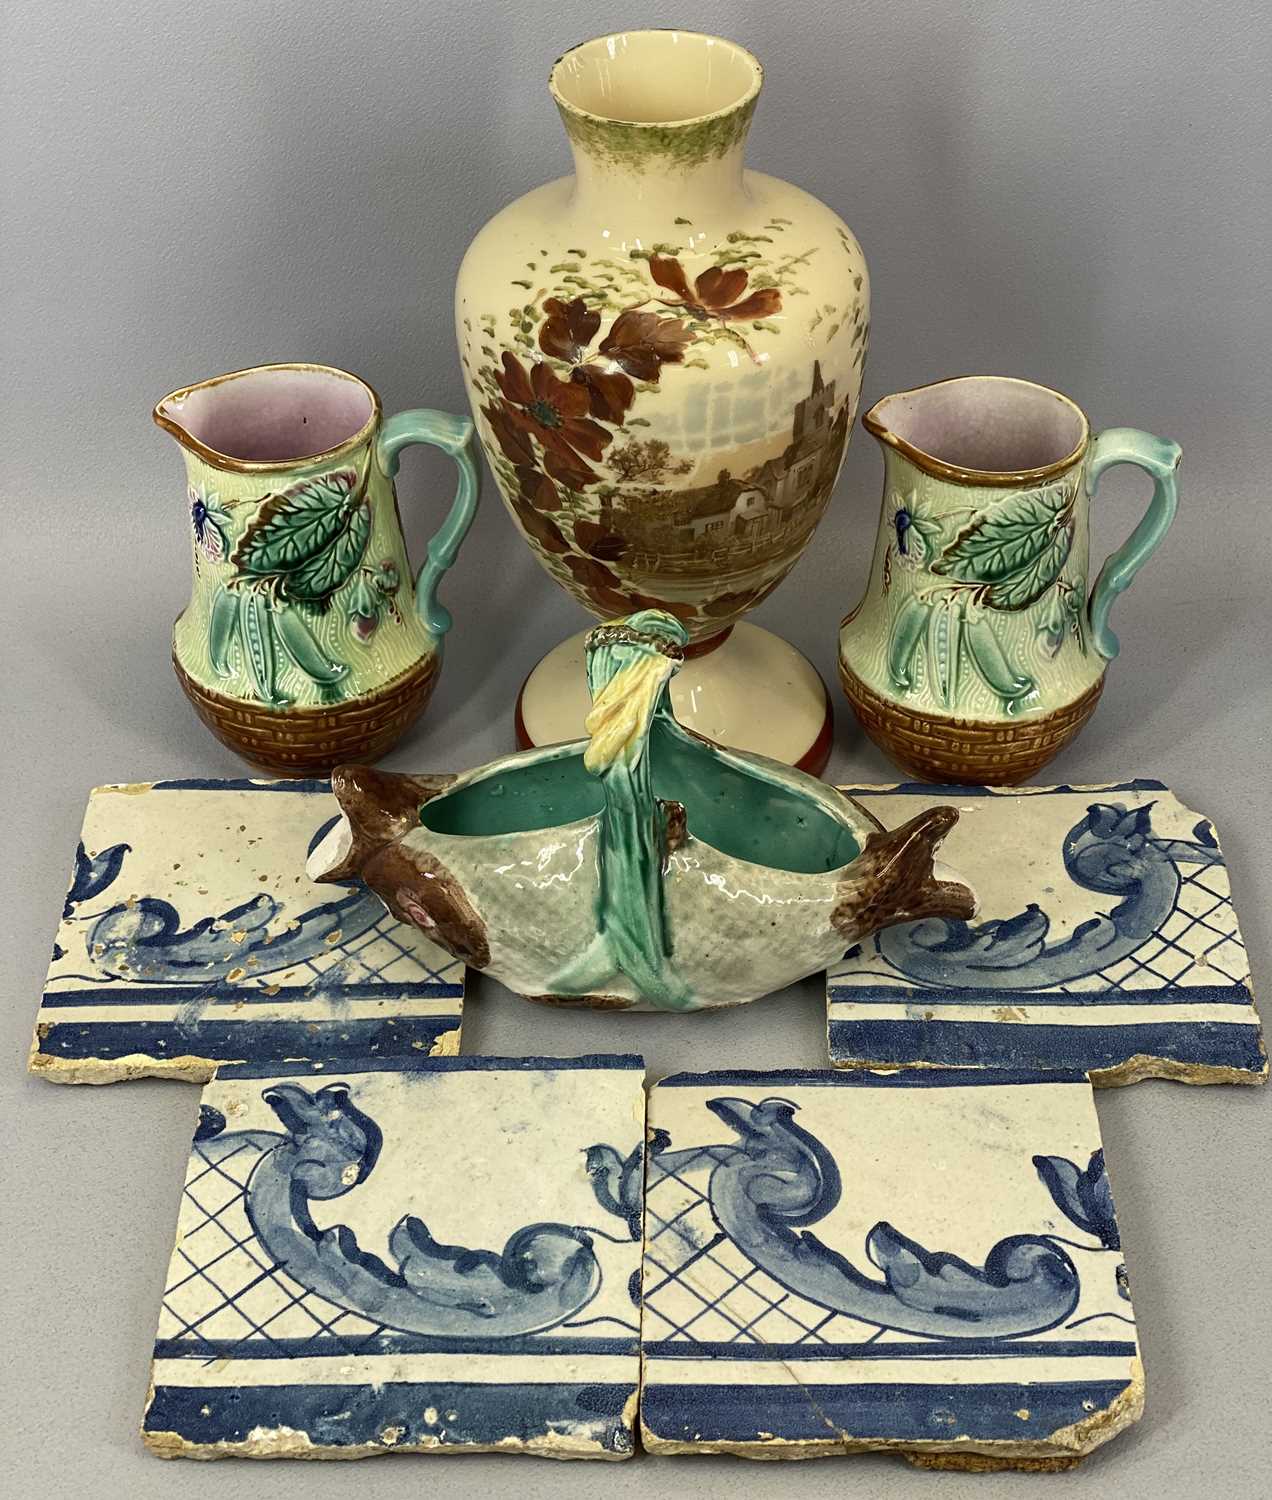 MAJOLICA JUGS, A PAIR - late 19th century, moulded with flowers, leaves and with basket weave